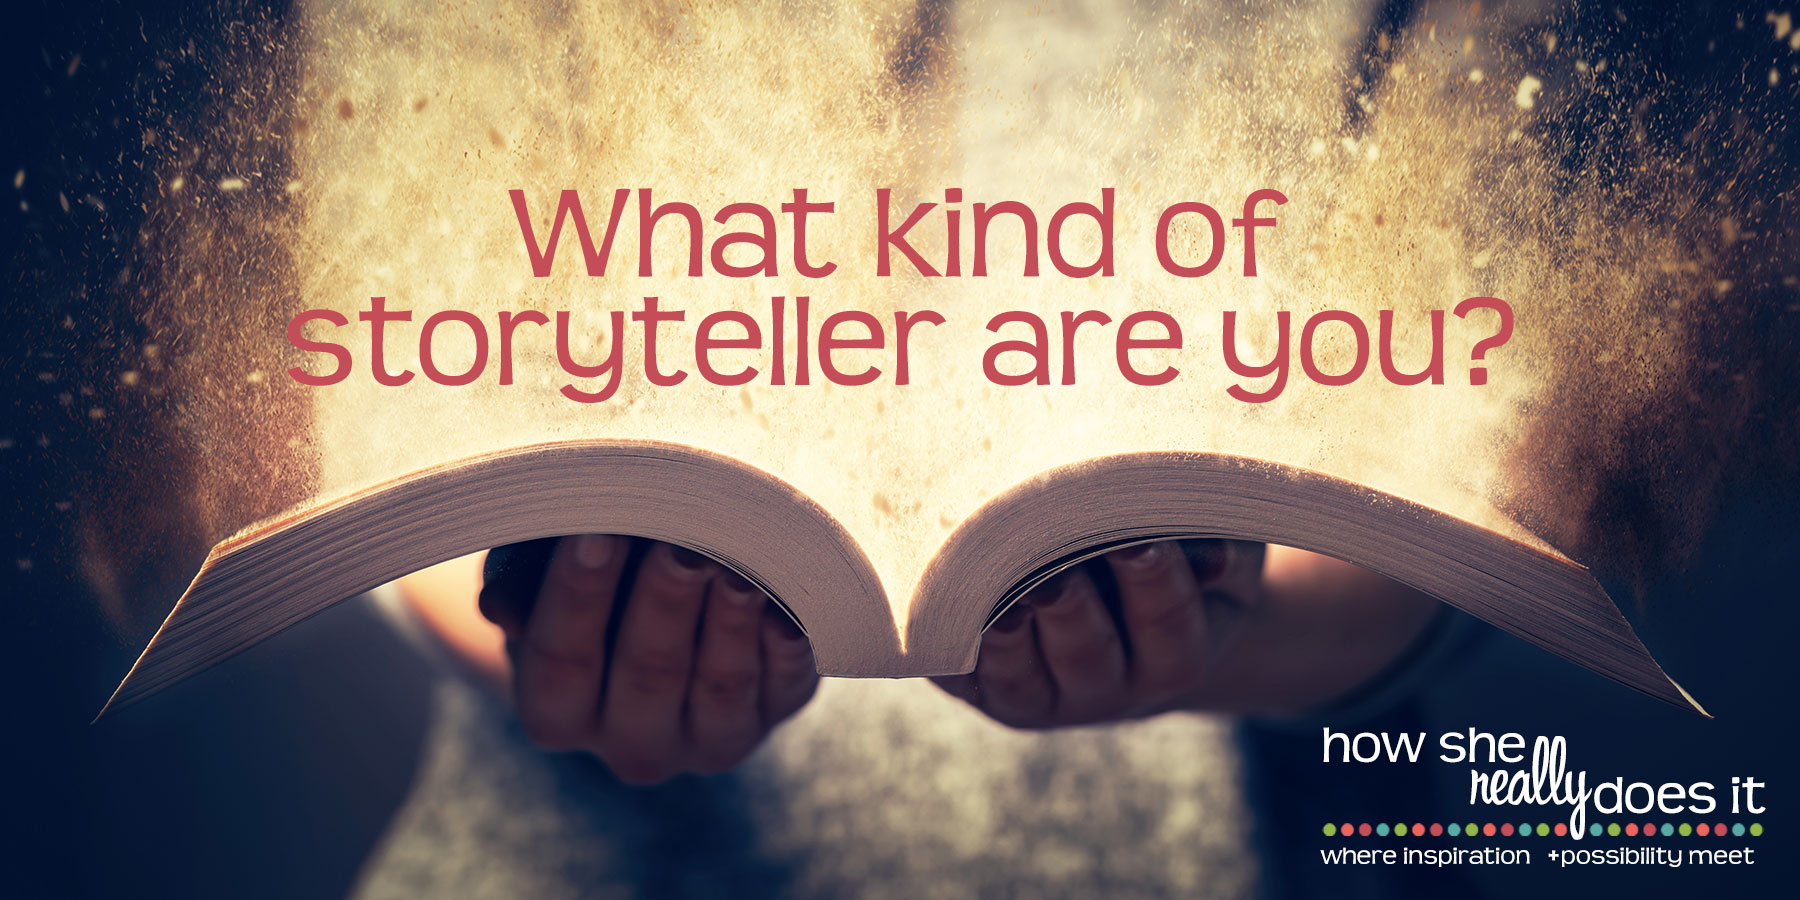 What kind of storyteller are you?